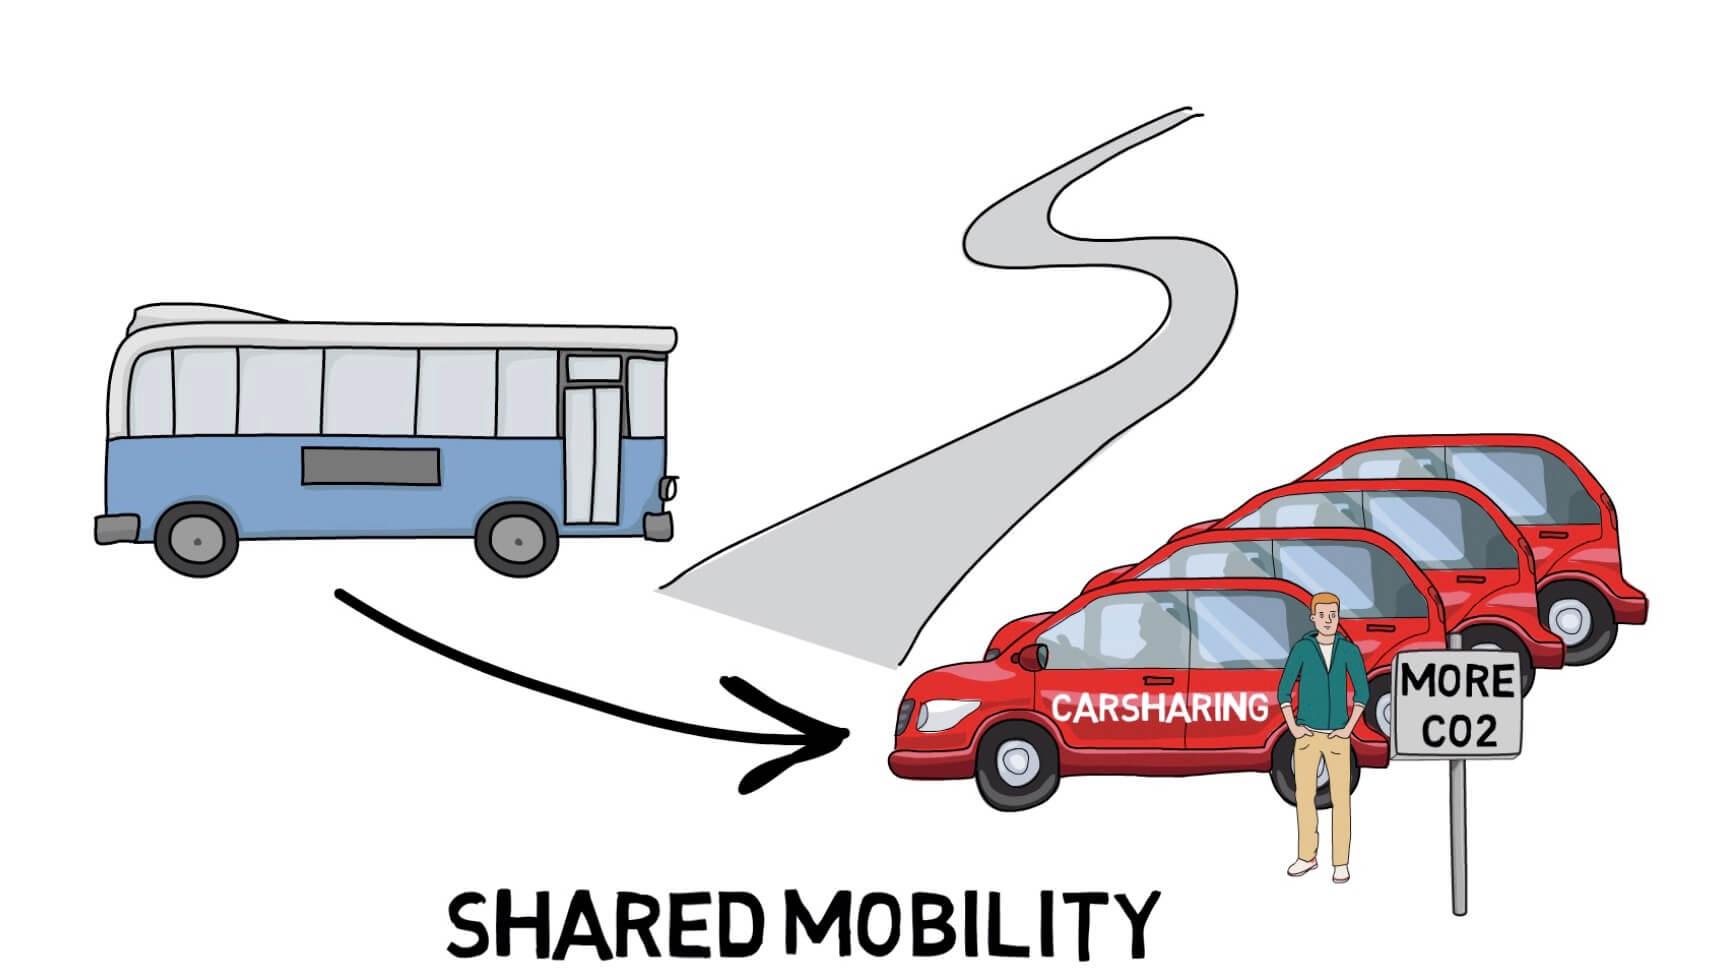 Shared Mobility don't necessarily lead to lower emissions